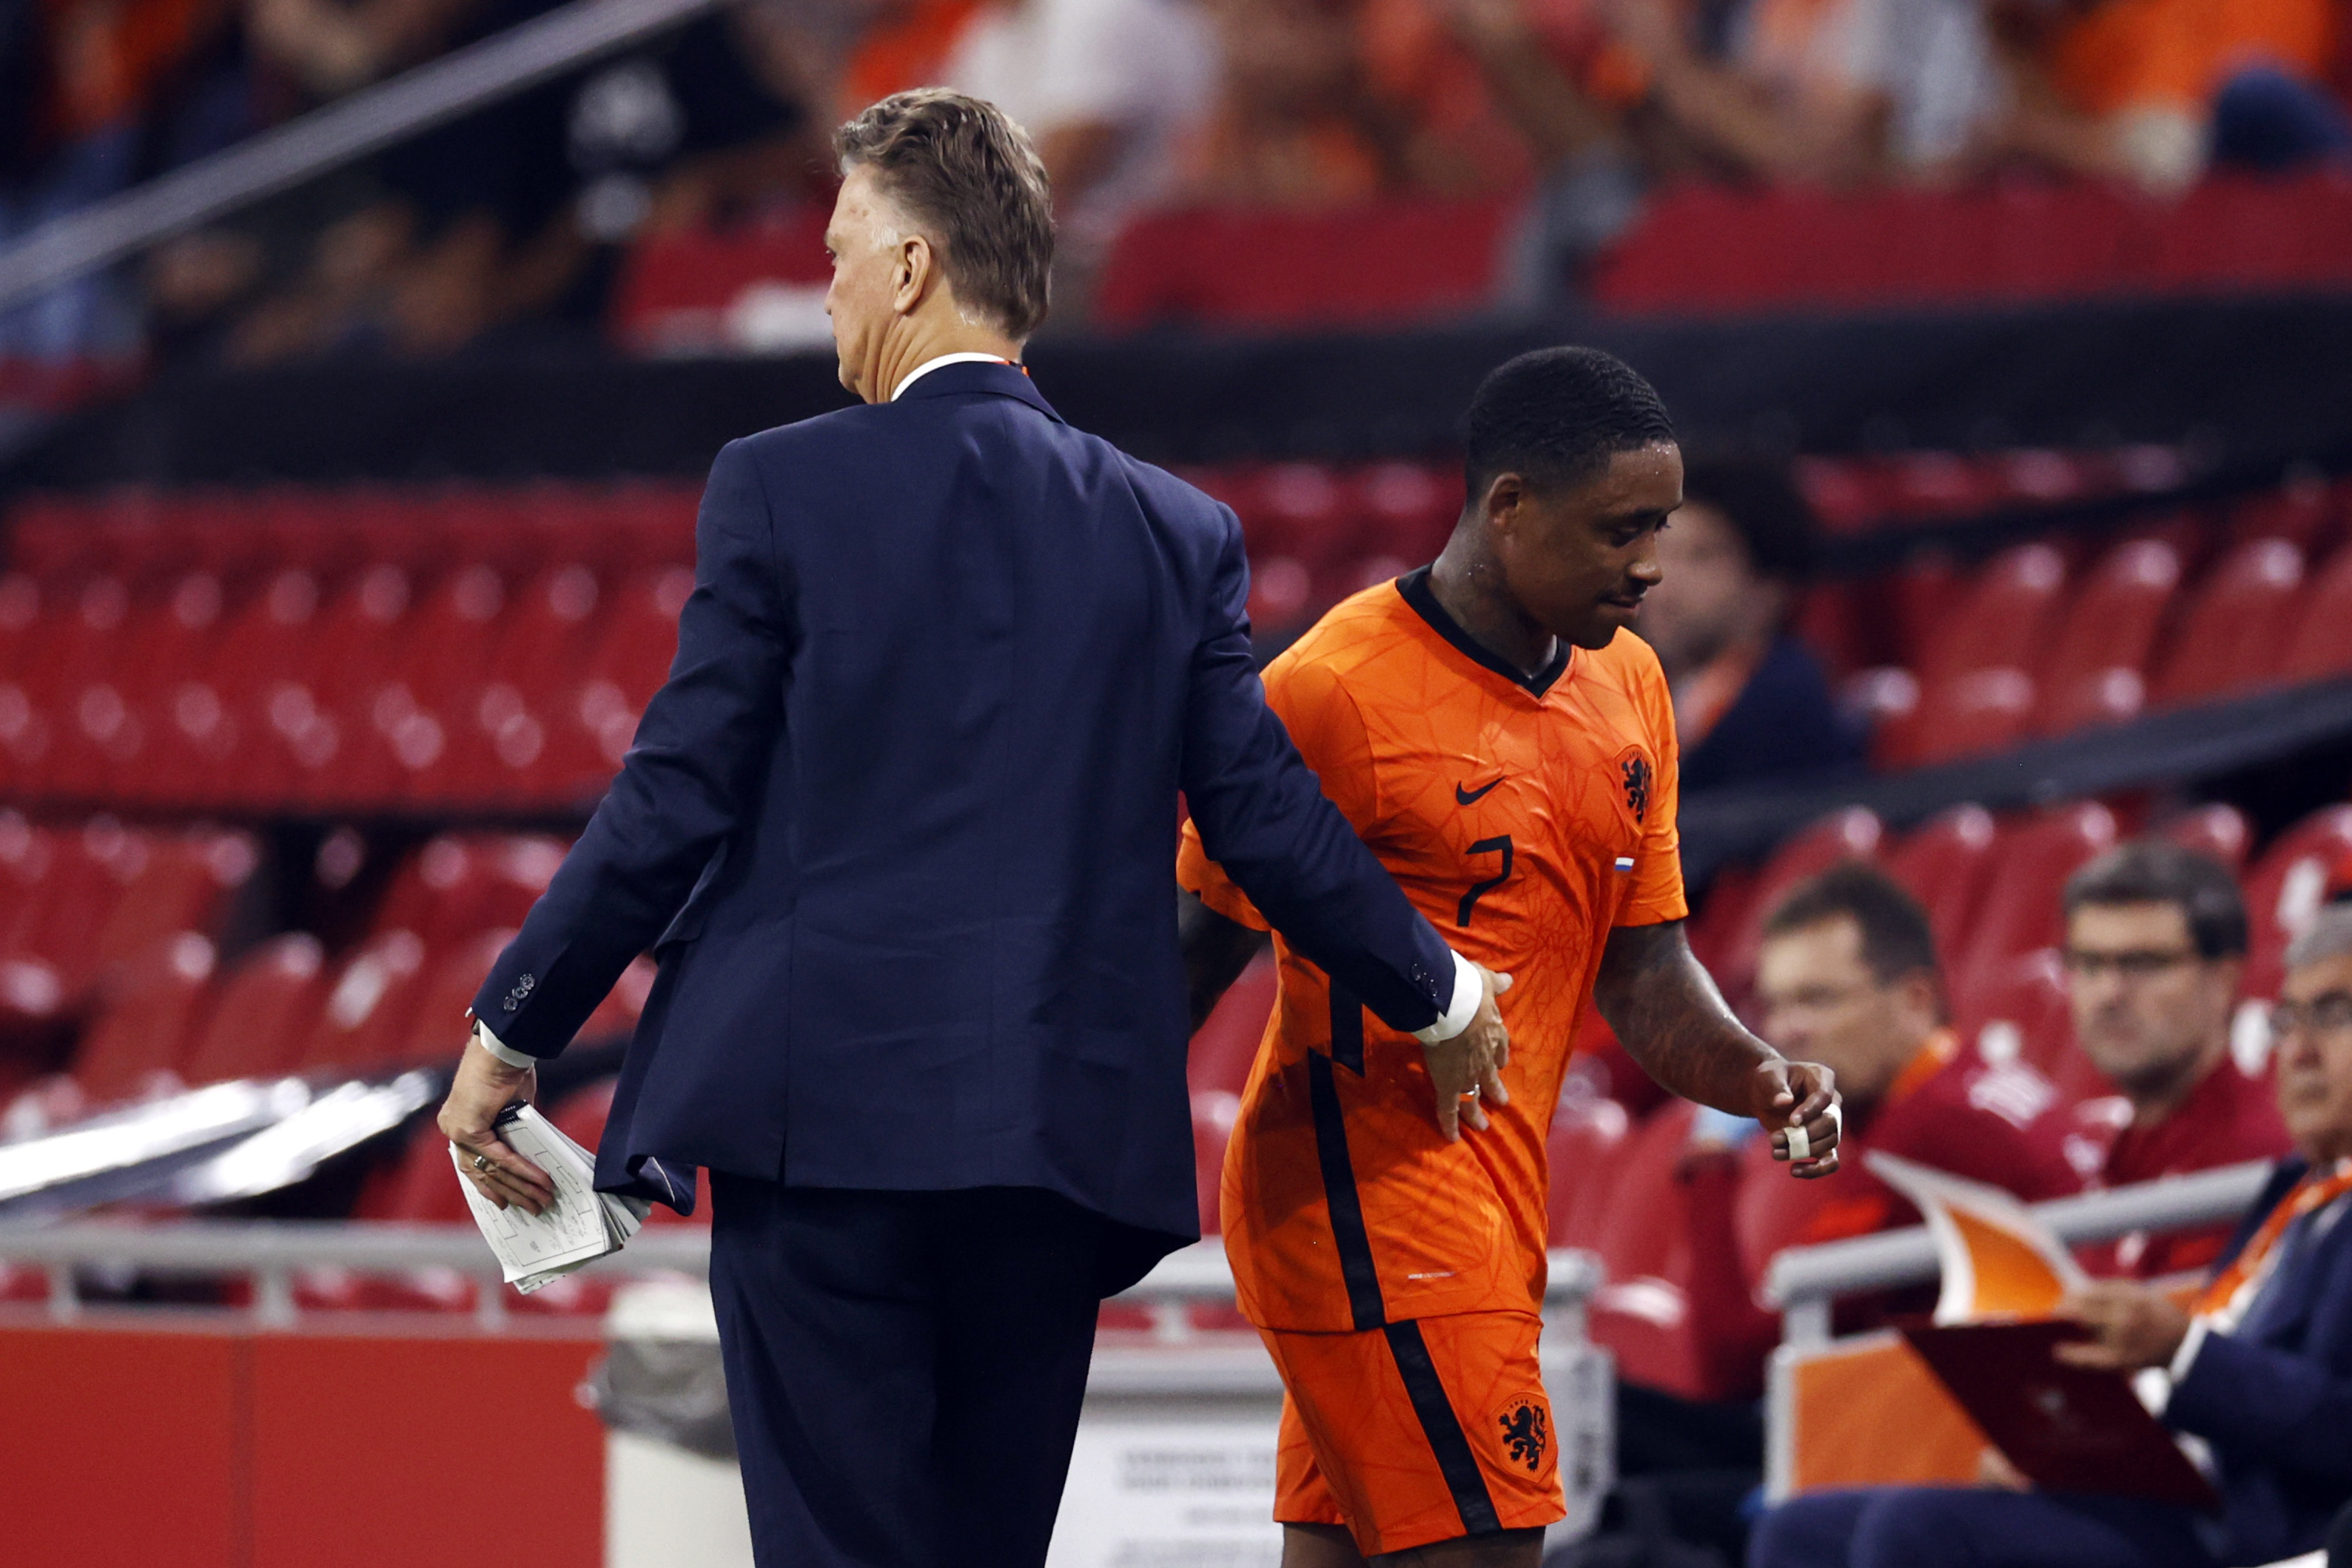 Steven Bergwijn adds to Tottenham injury concerns after Son Heung-min scare